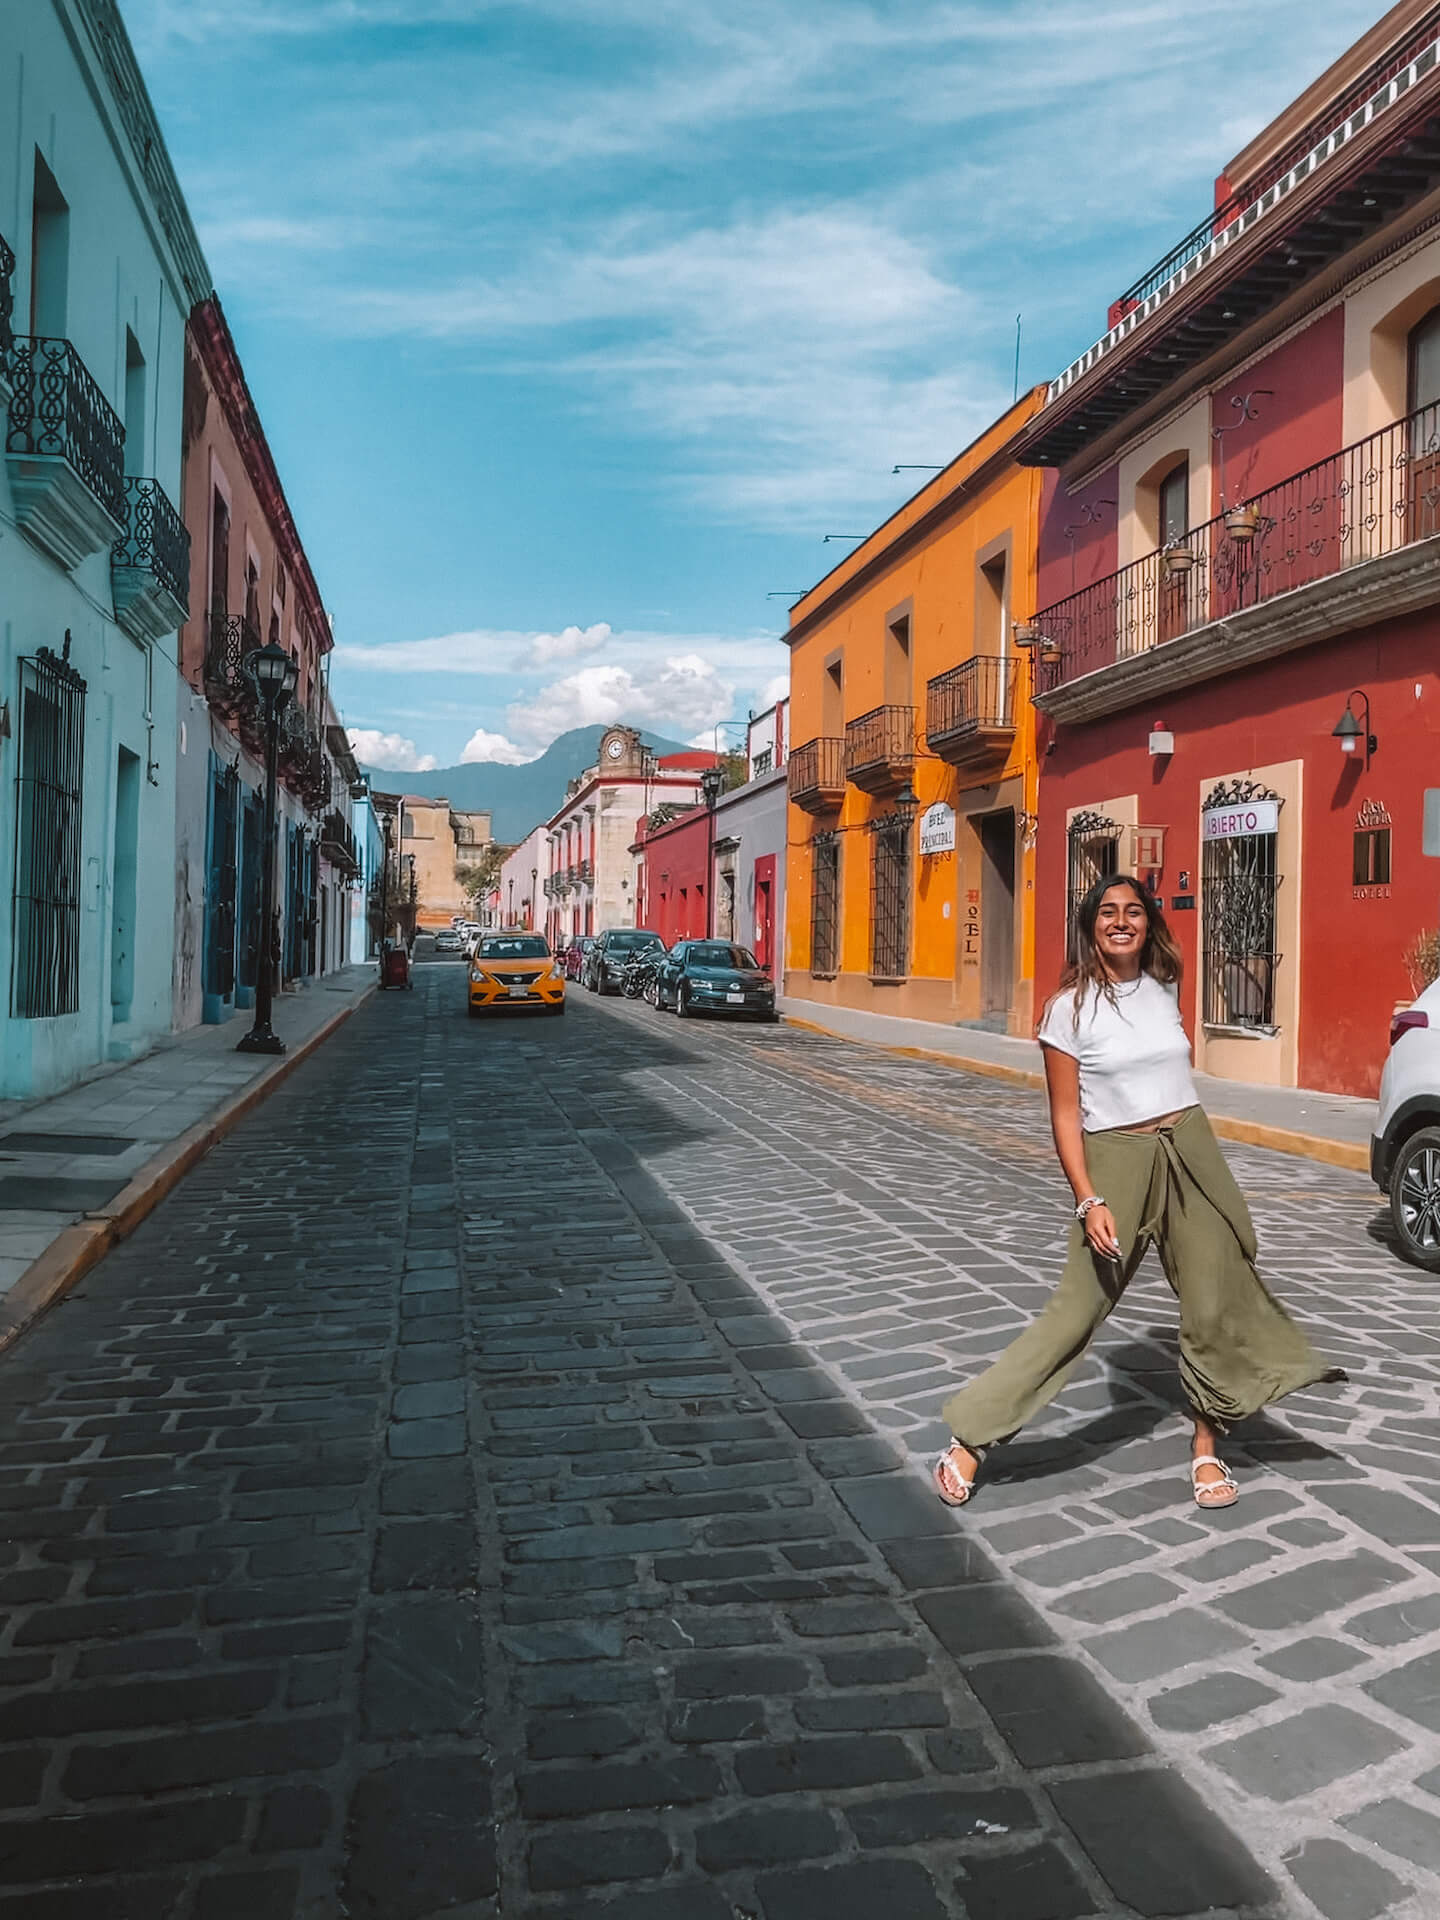 Nabila Ismail poses in the middle of a cobbled street lined with colorful buildings